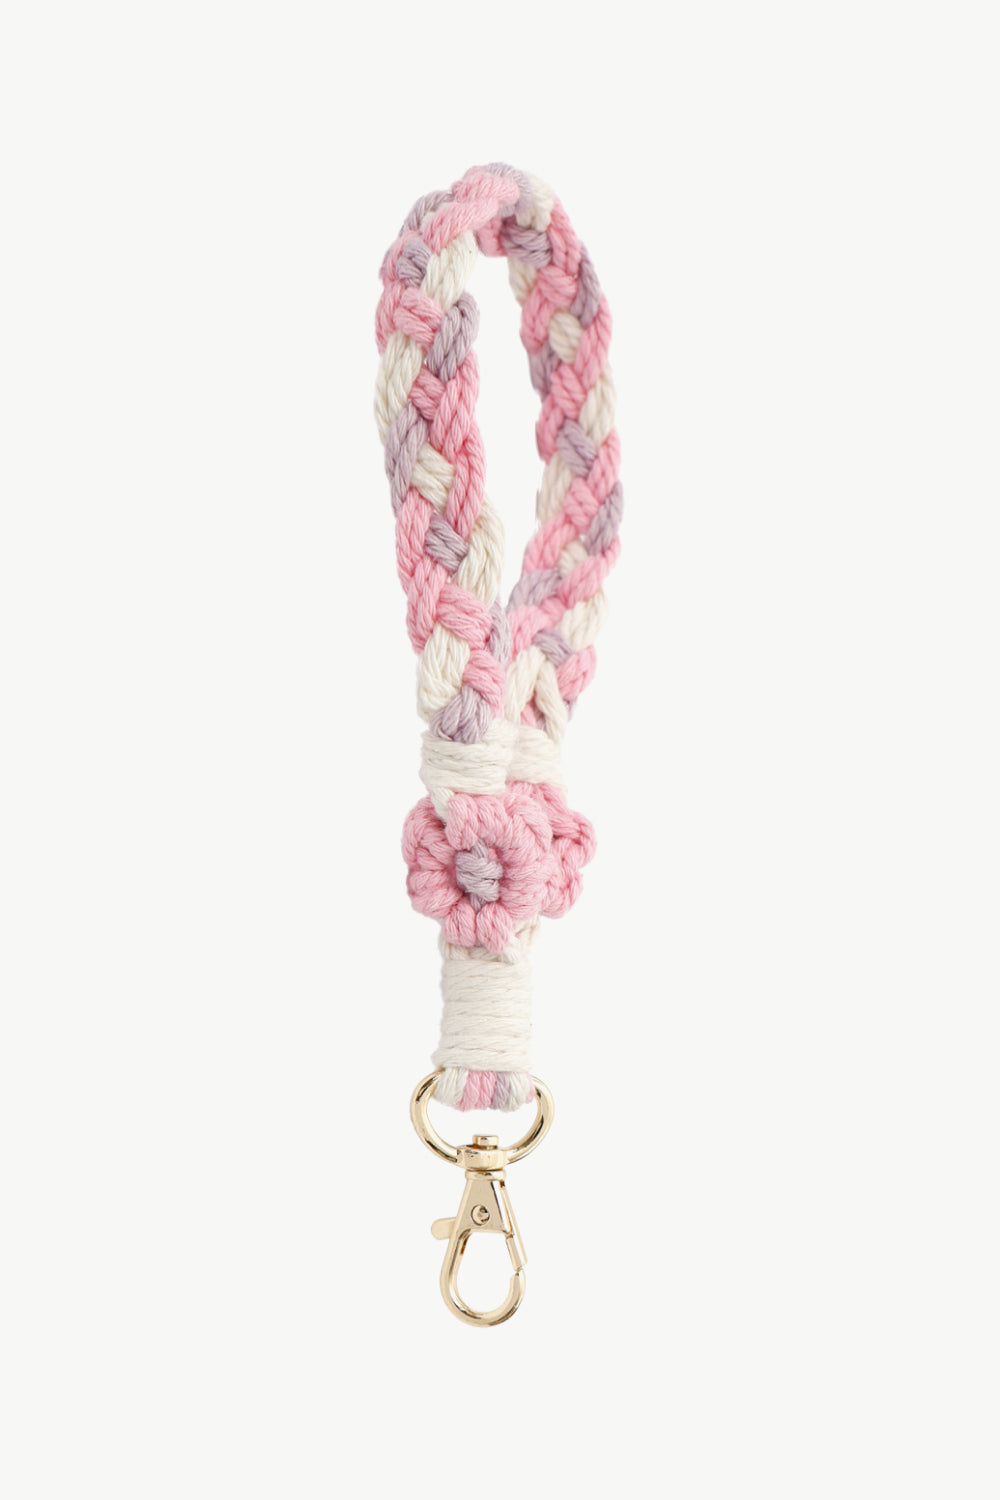 Trendsi Cupid Beauty Supplies Blush Pink / One Size Keychains Floral Braided Wristlet Key Chain